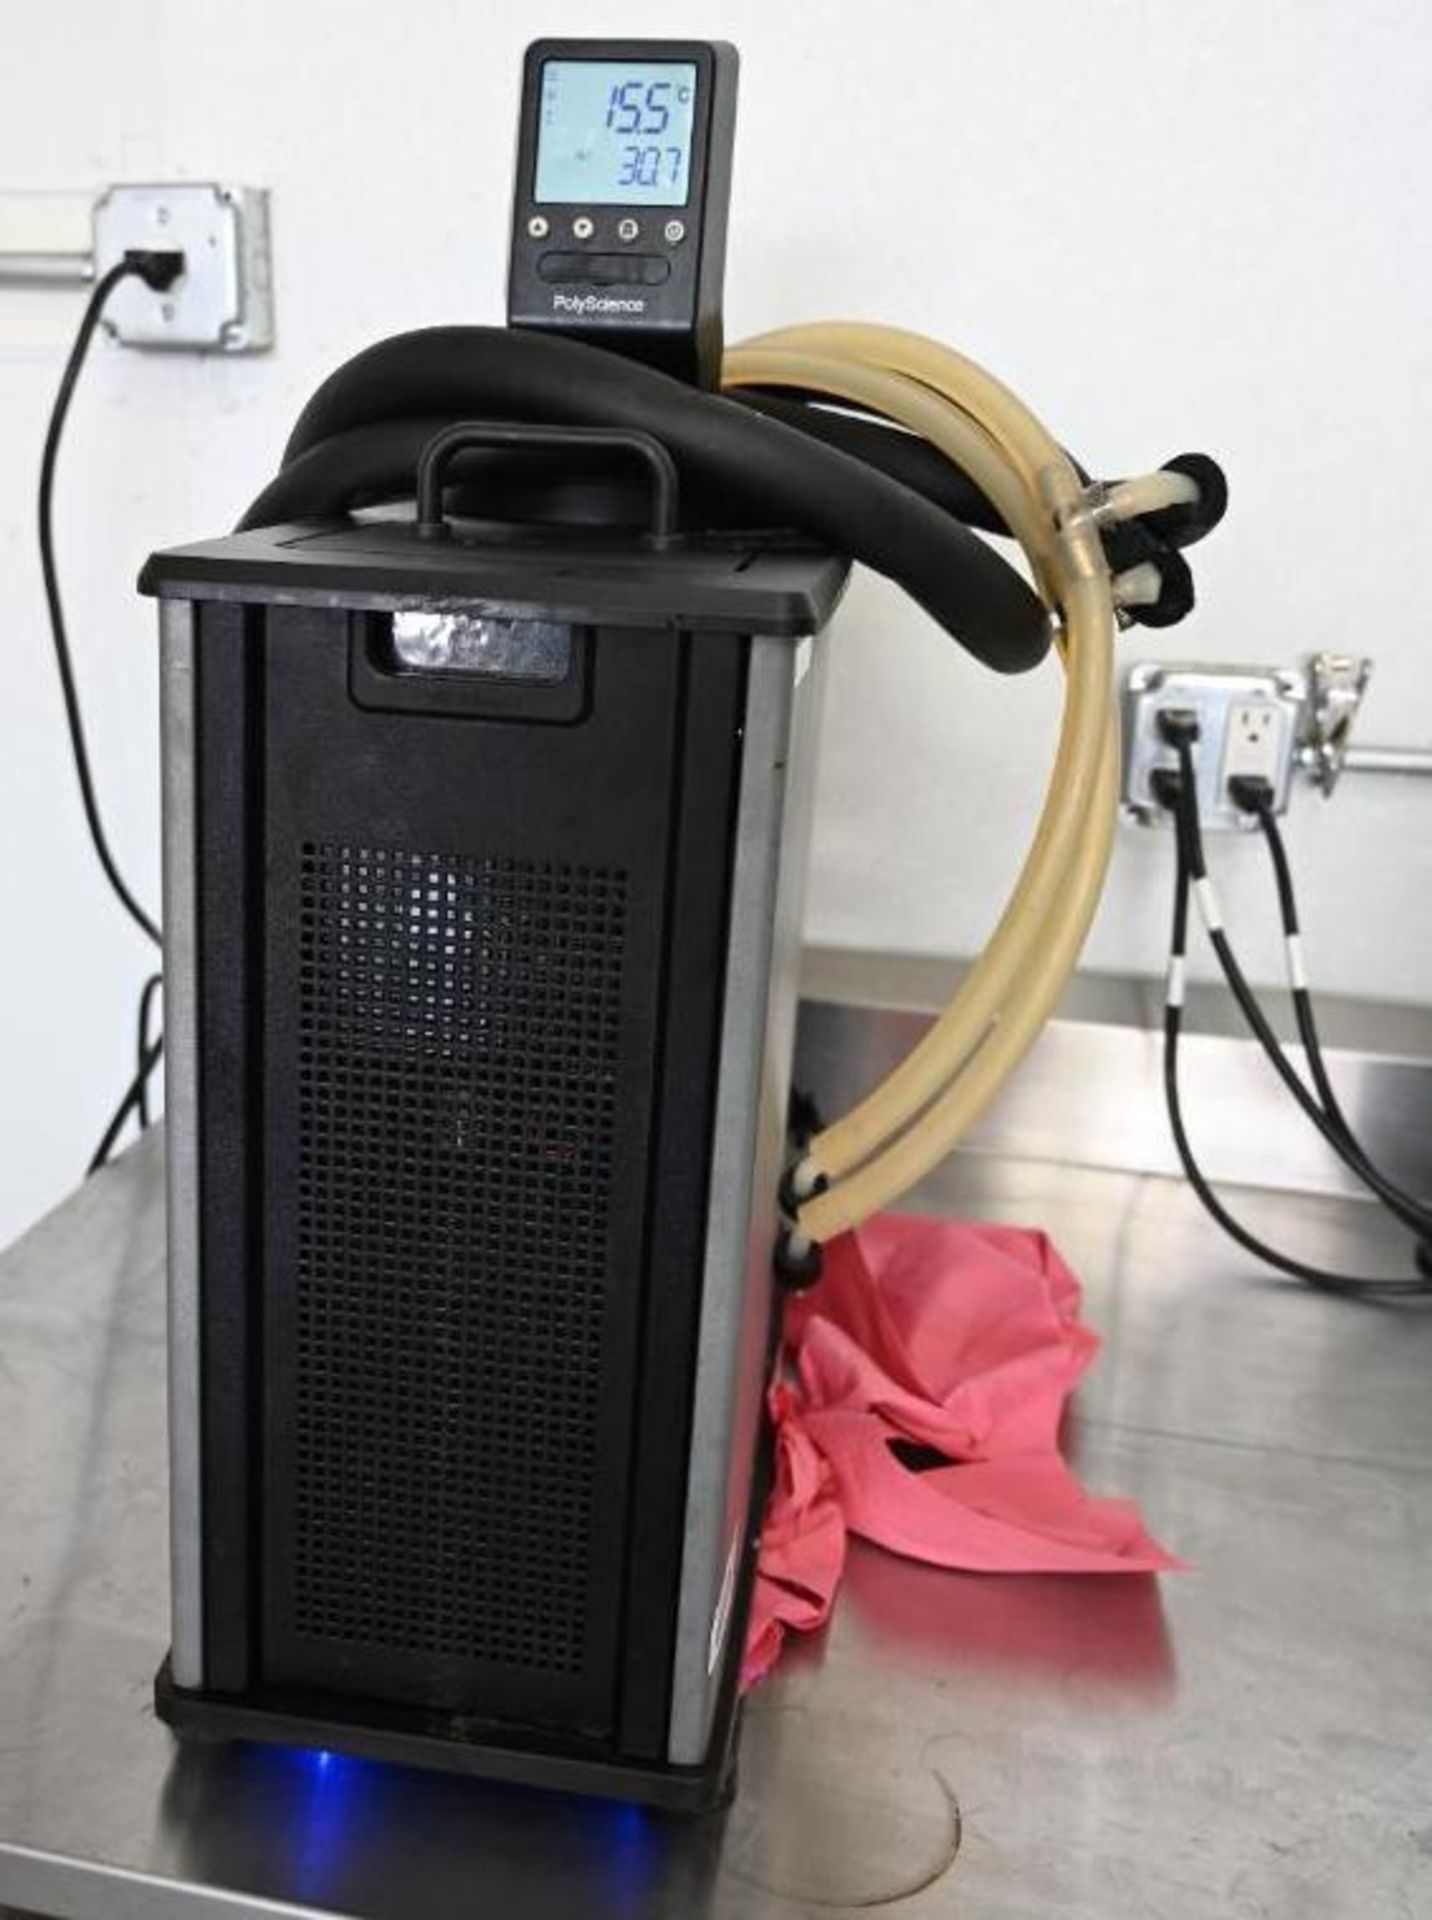 Poly Science Bench Top Chiller model 580-340 - Image 2 of 9